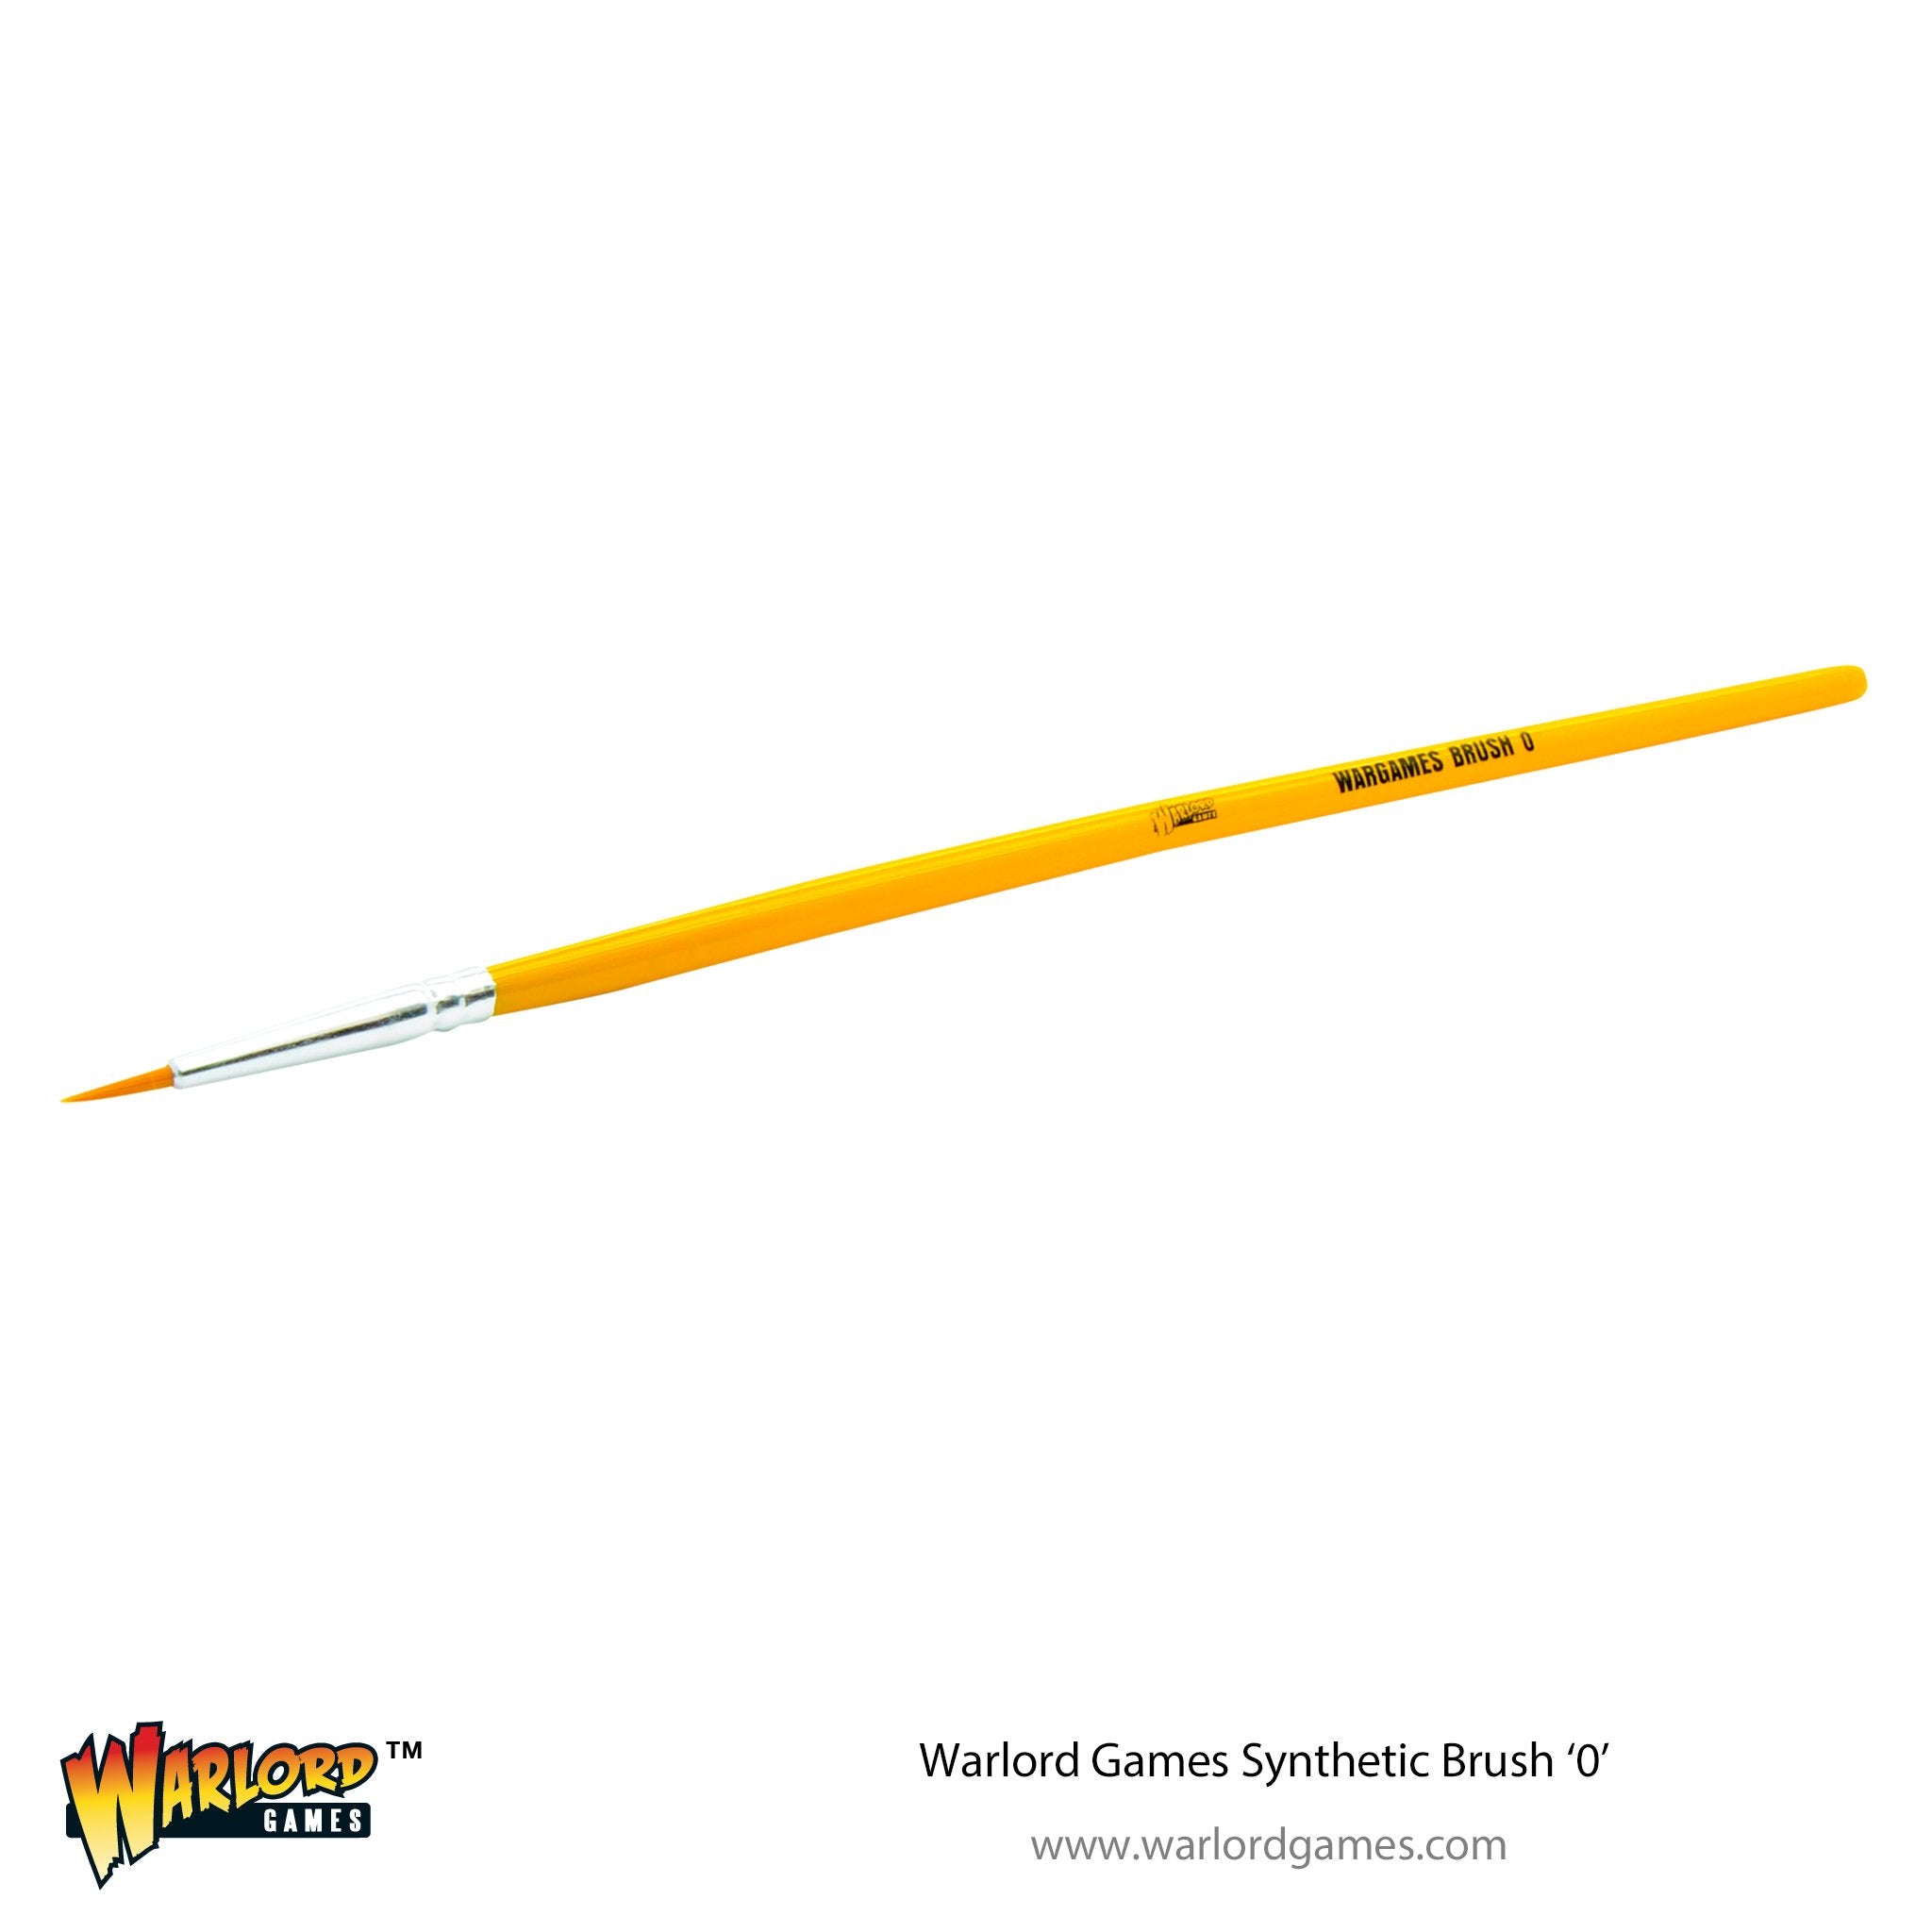 Warlord Games Synthetic Brush '0'